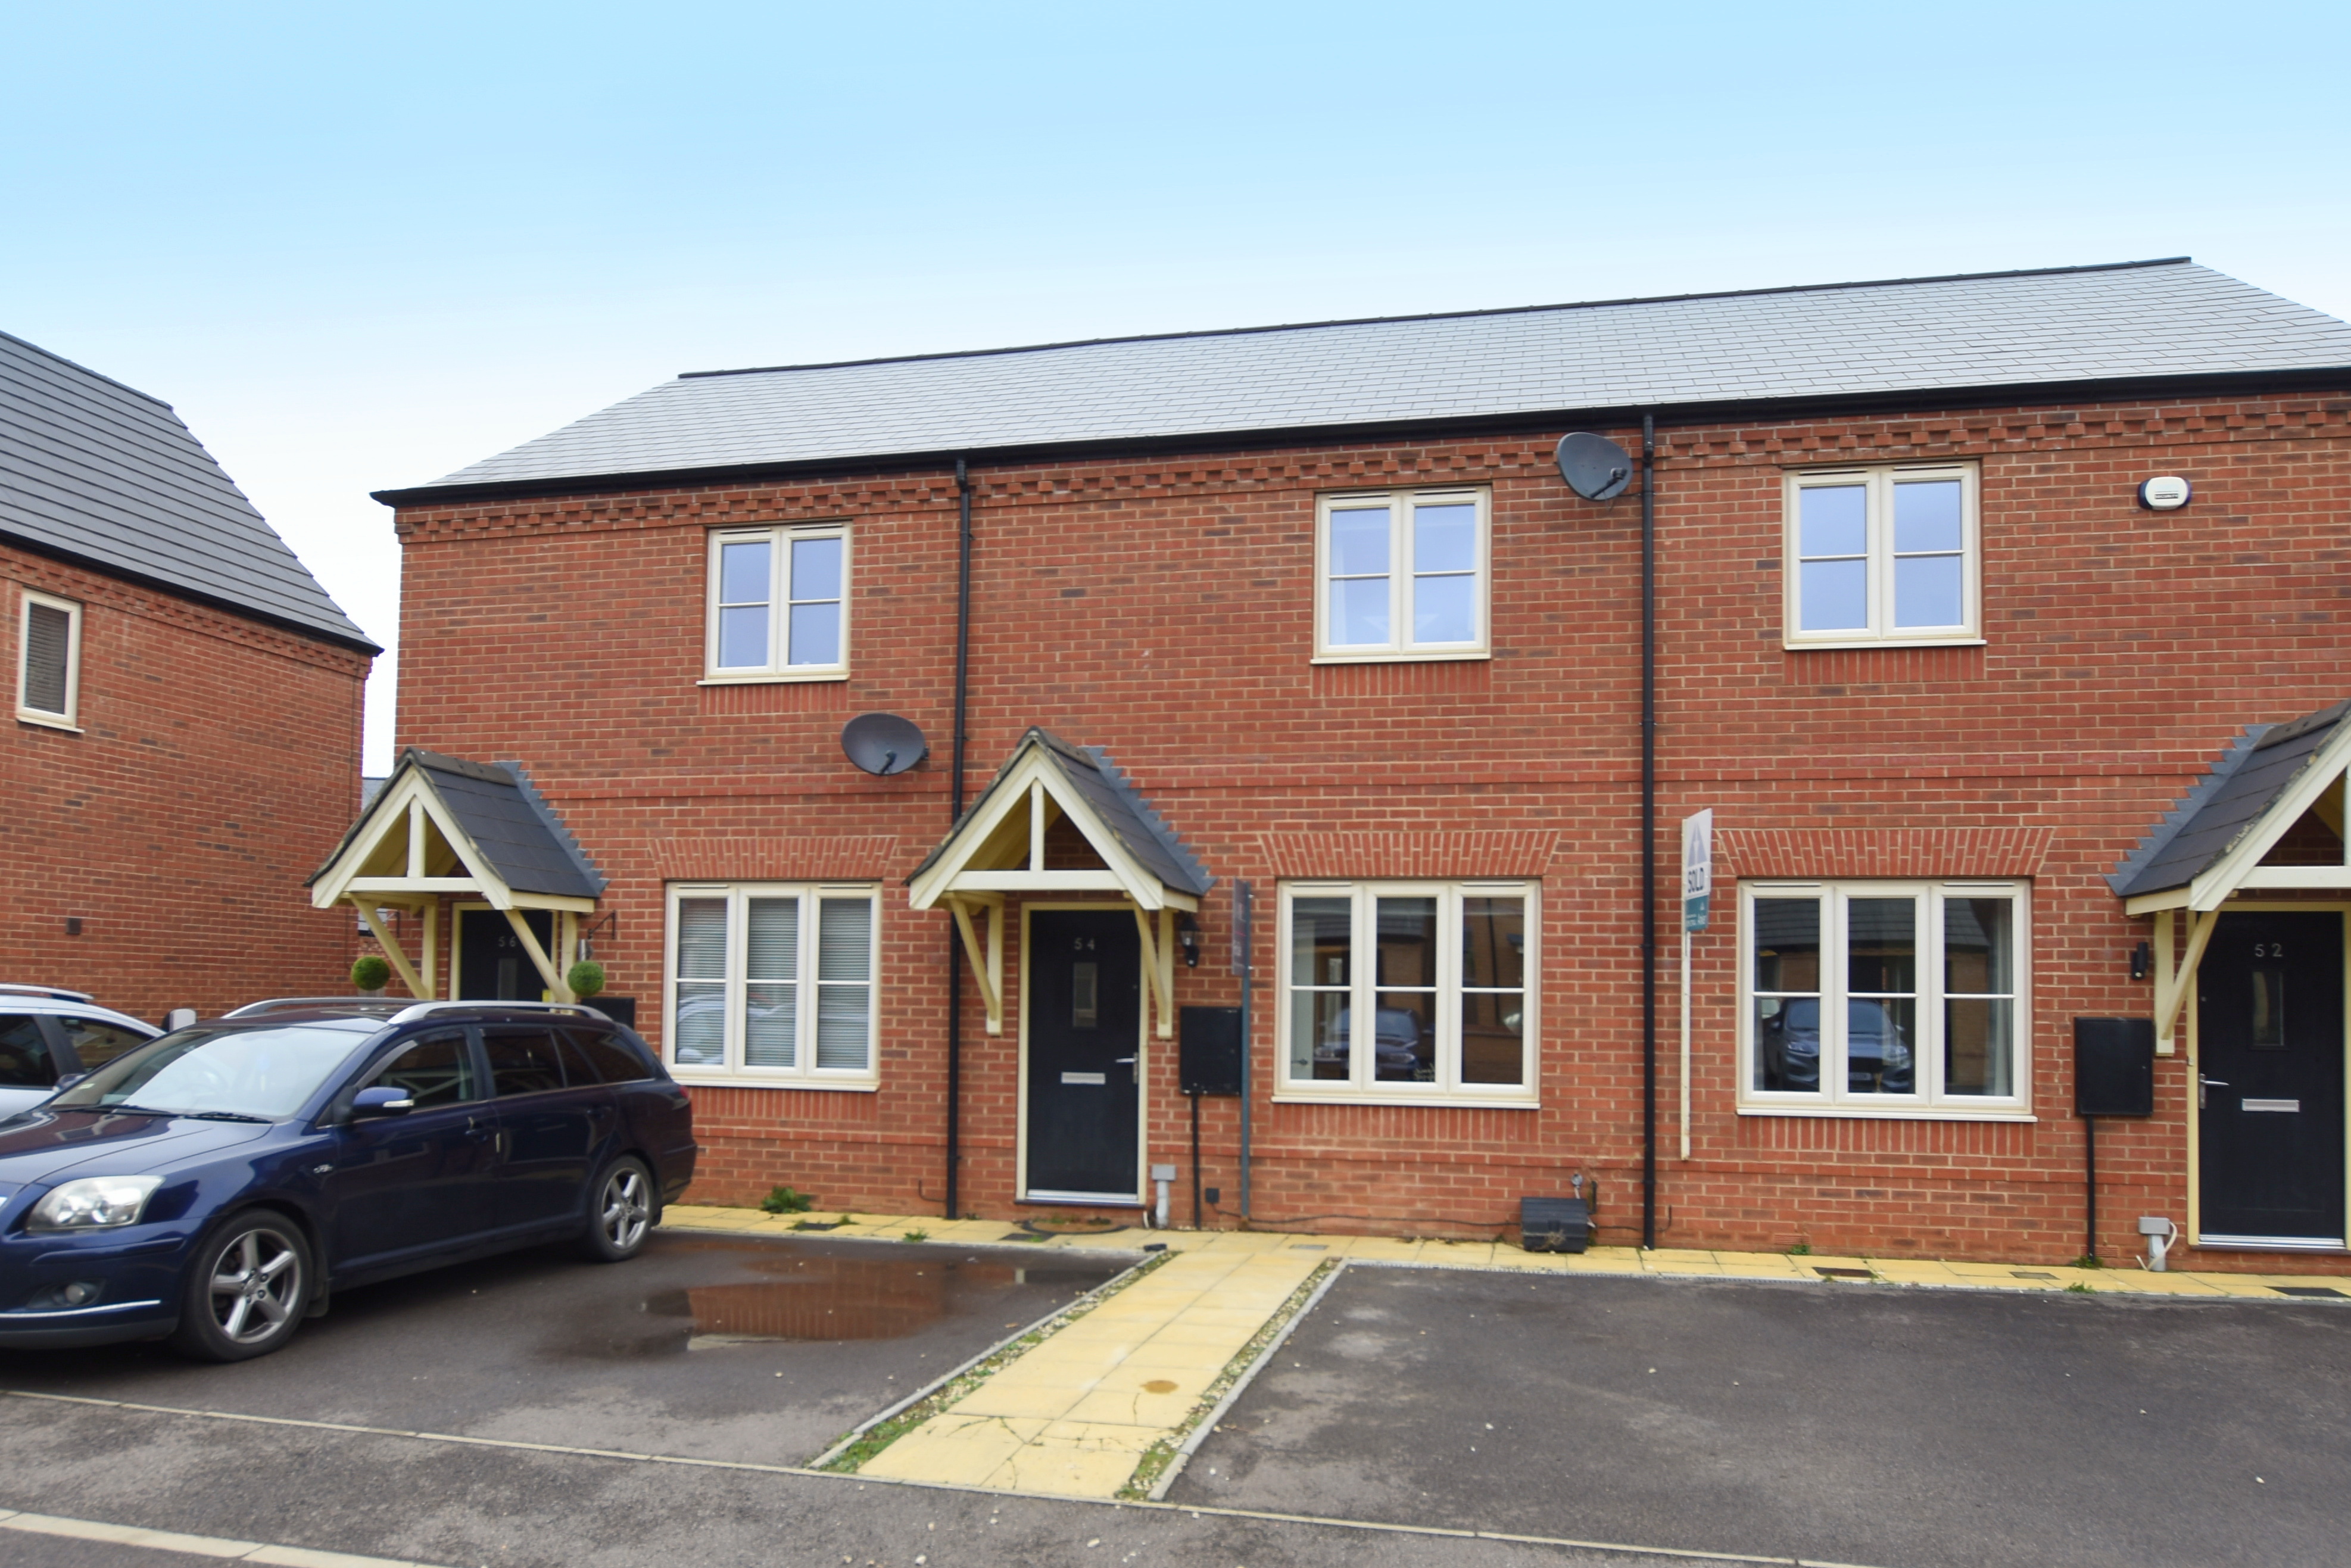 2 bed  for sale in George Parish Road, Banbury - Property Image 1